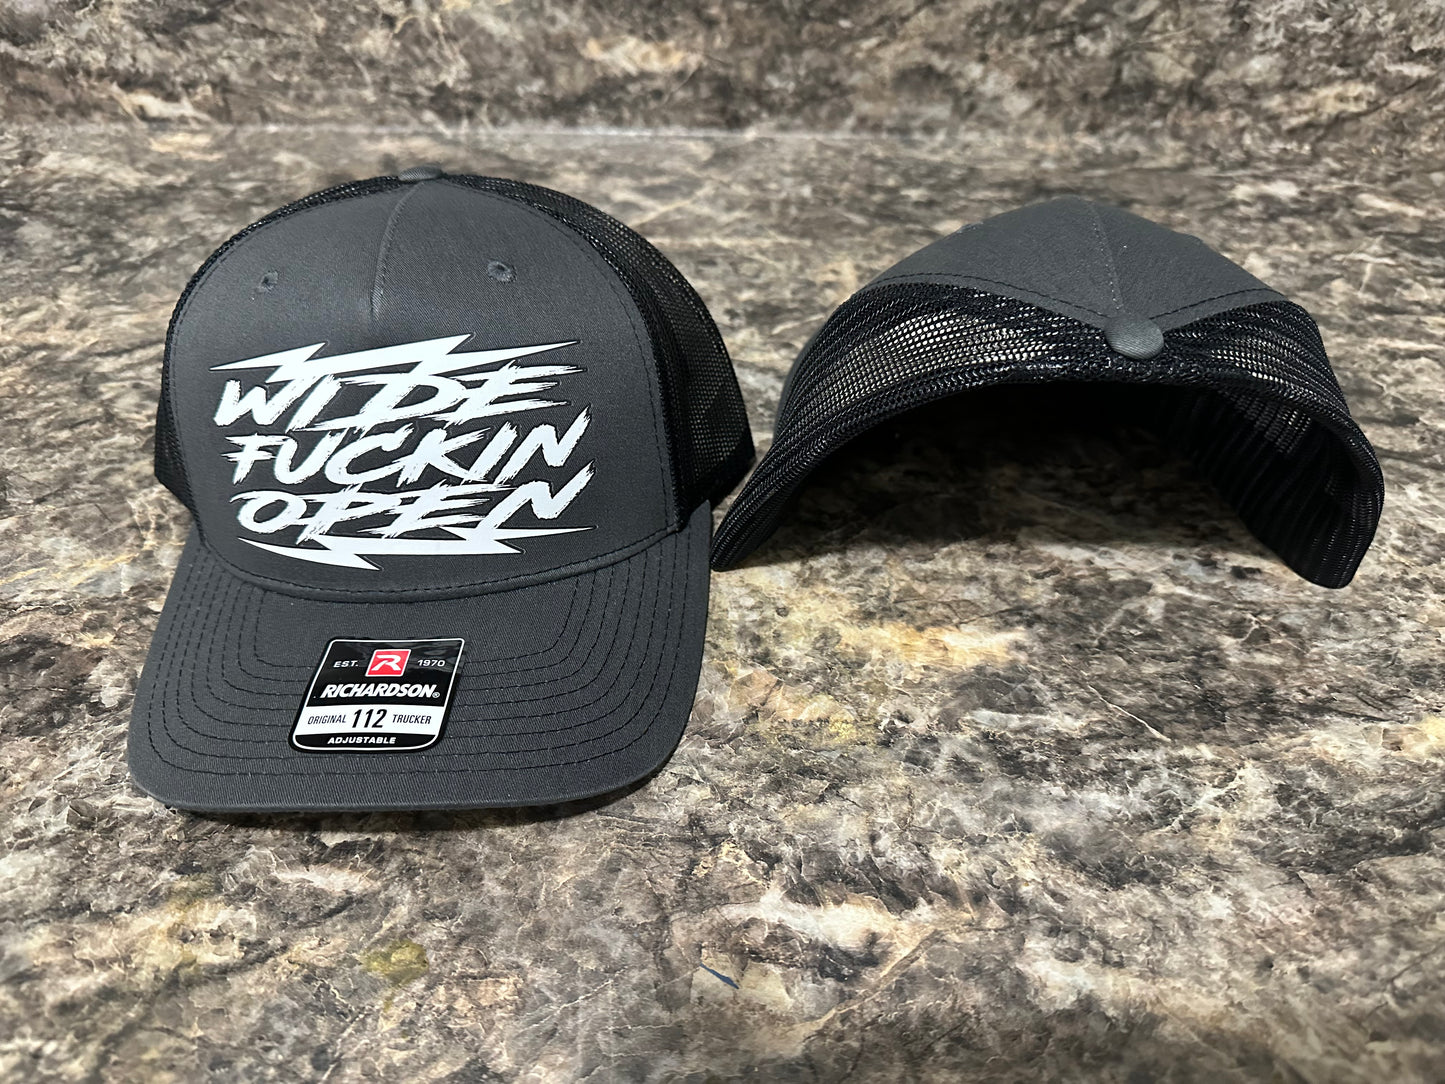 WFO 4 LIFE ™ - "Wide Fuckin Open" Curved Bill / Mesh Snapback Hat - 2 Color Options